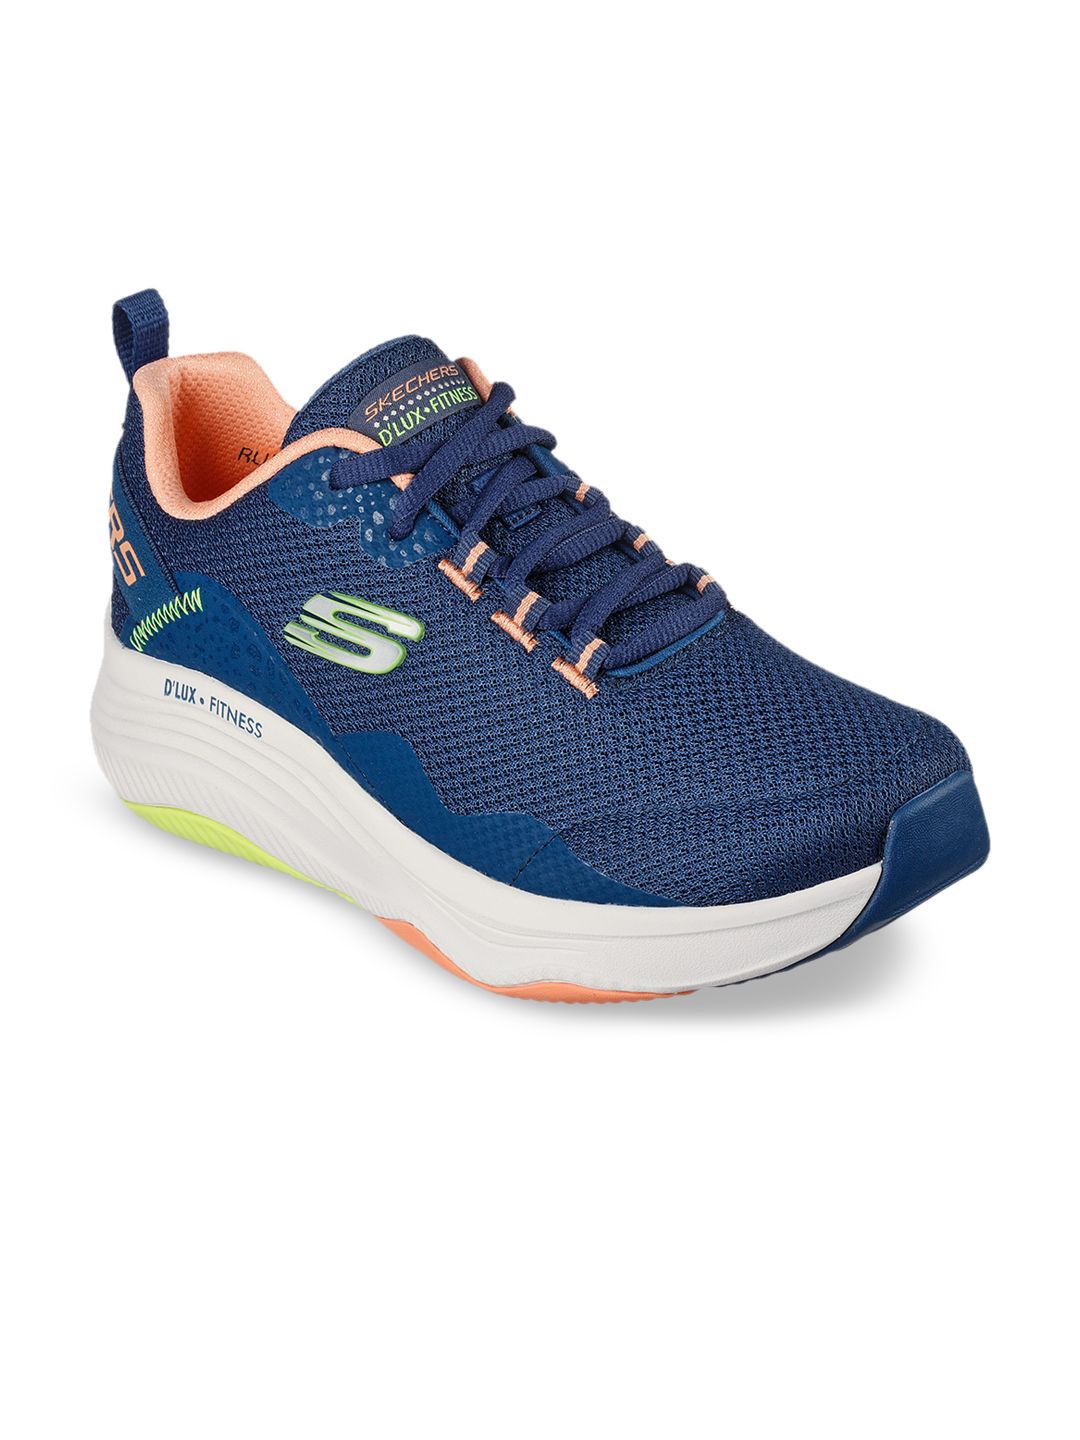 Skechers Women Navy Blue Lace-Up Everyday Sneakers Price in India